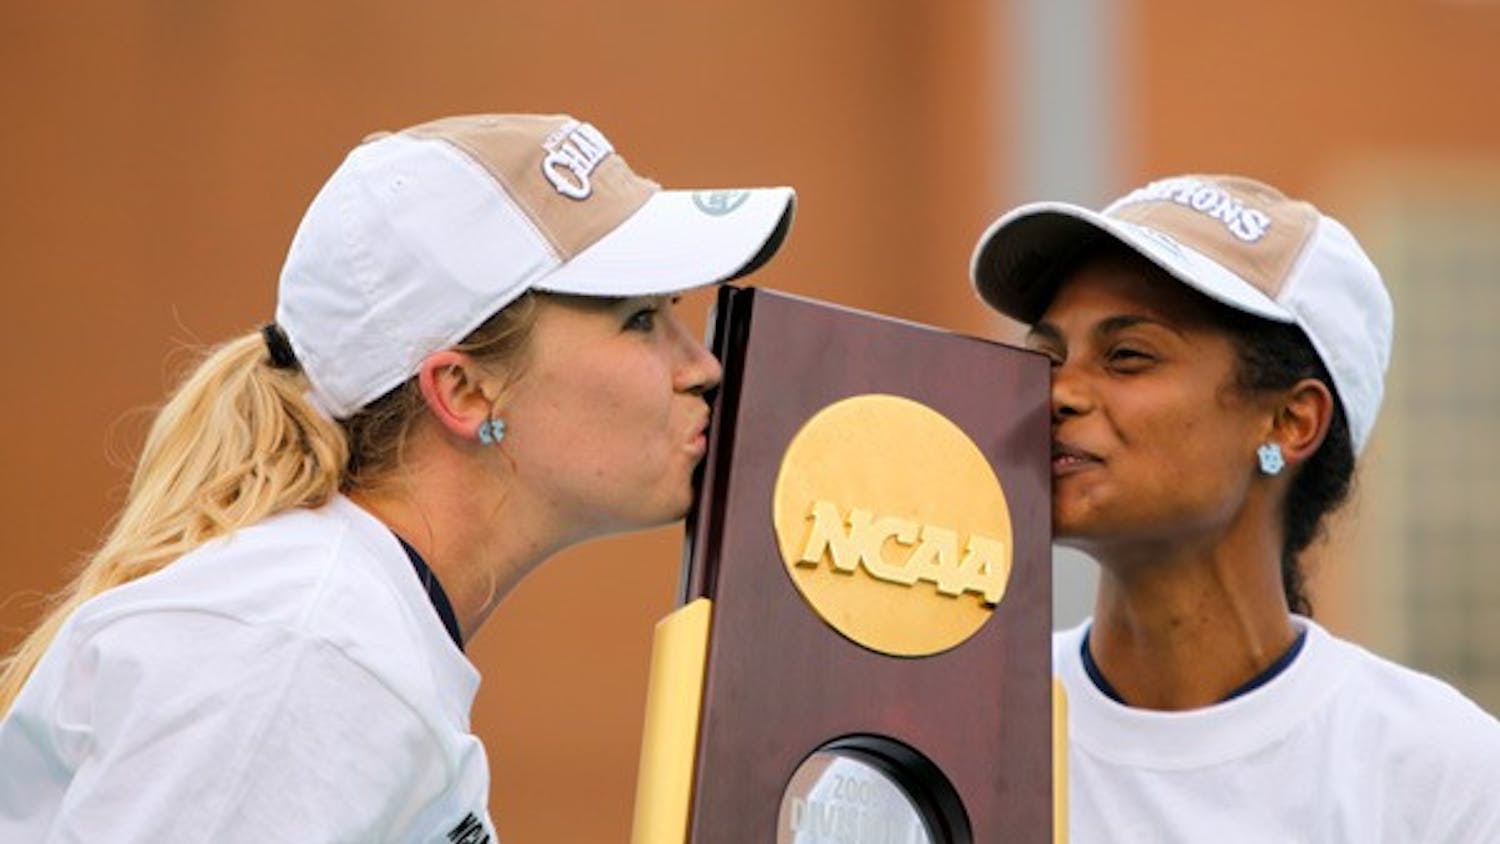 South Africans Dani Forword and Illse Davids helped carry UNC’s field hockey team to a national championship. DTH/Phong Dinh